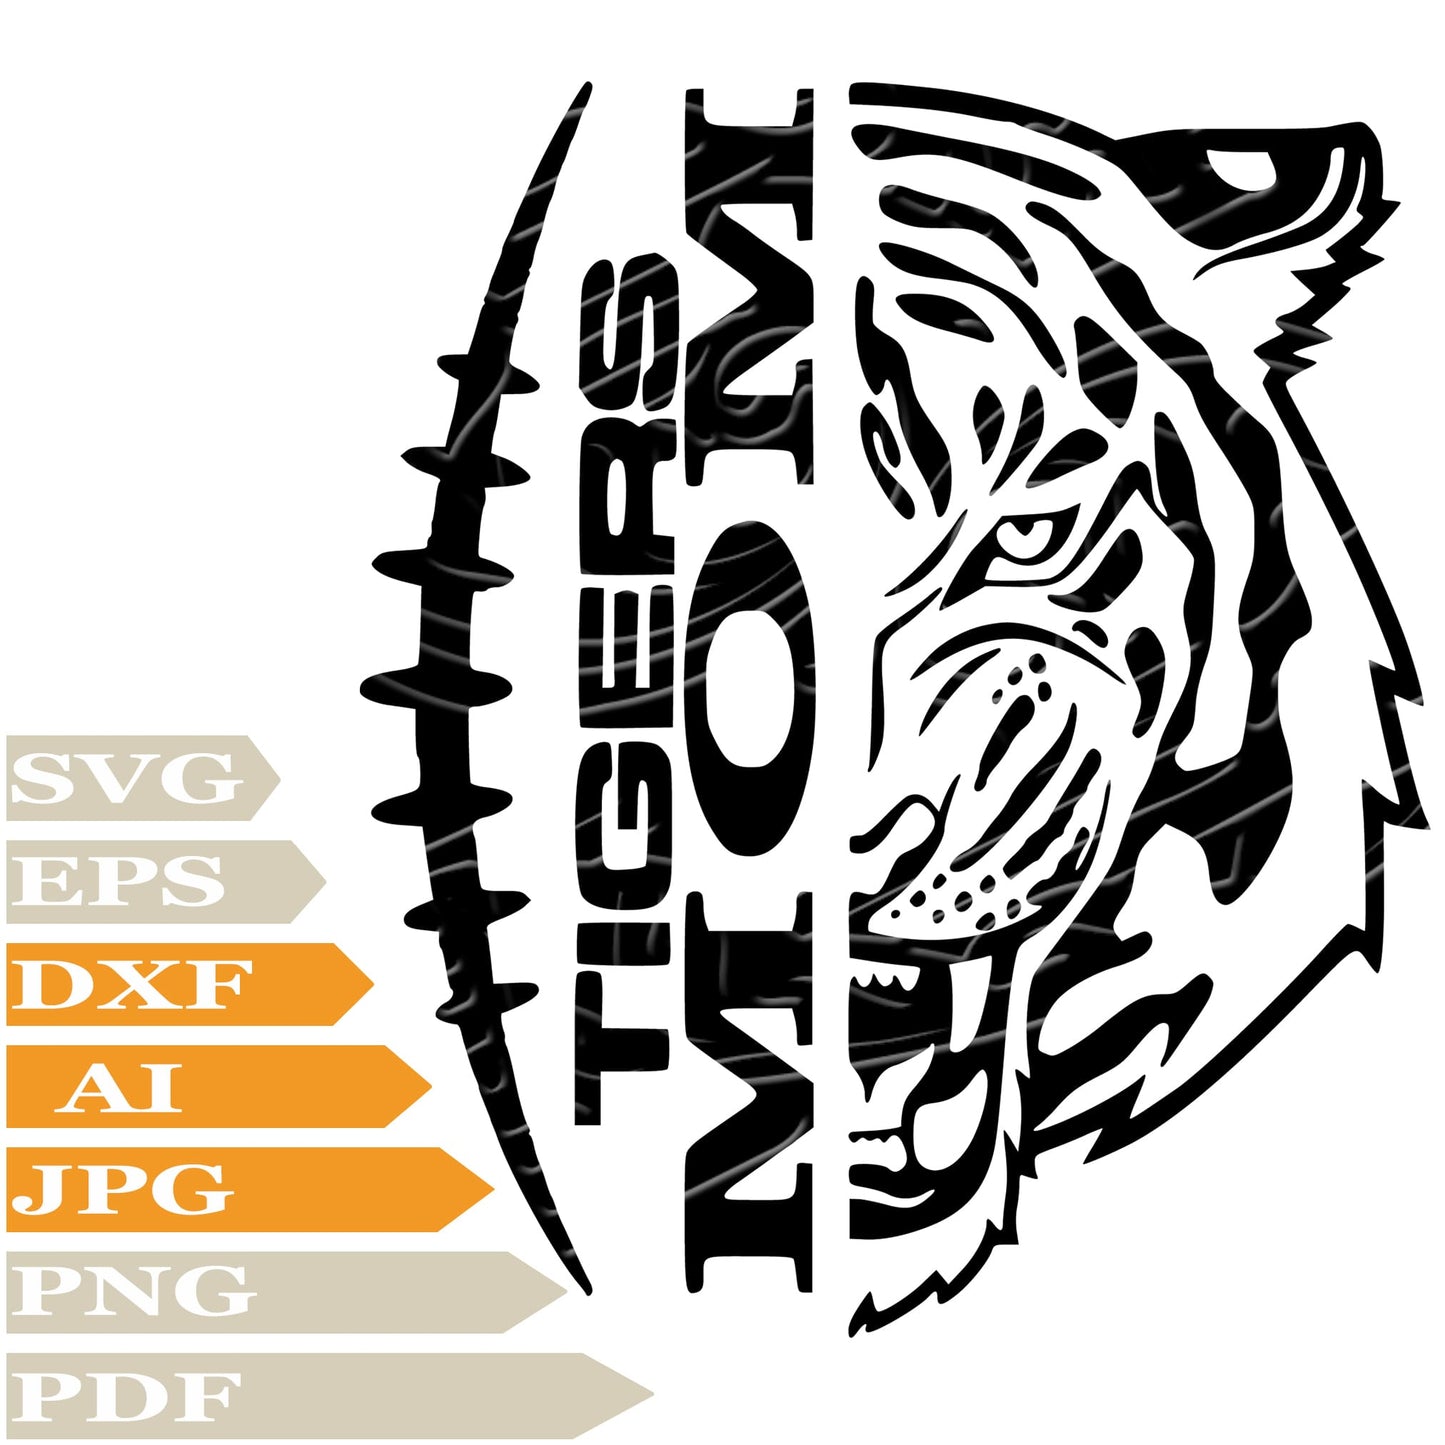 Tigers Football,Tigers Mom Logo Svg File, Image Cut, Png, For Tattoo, Silhouette, Digital Vector Download, Cut File, Clipart, For Cricut